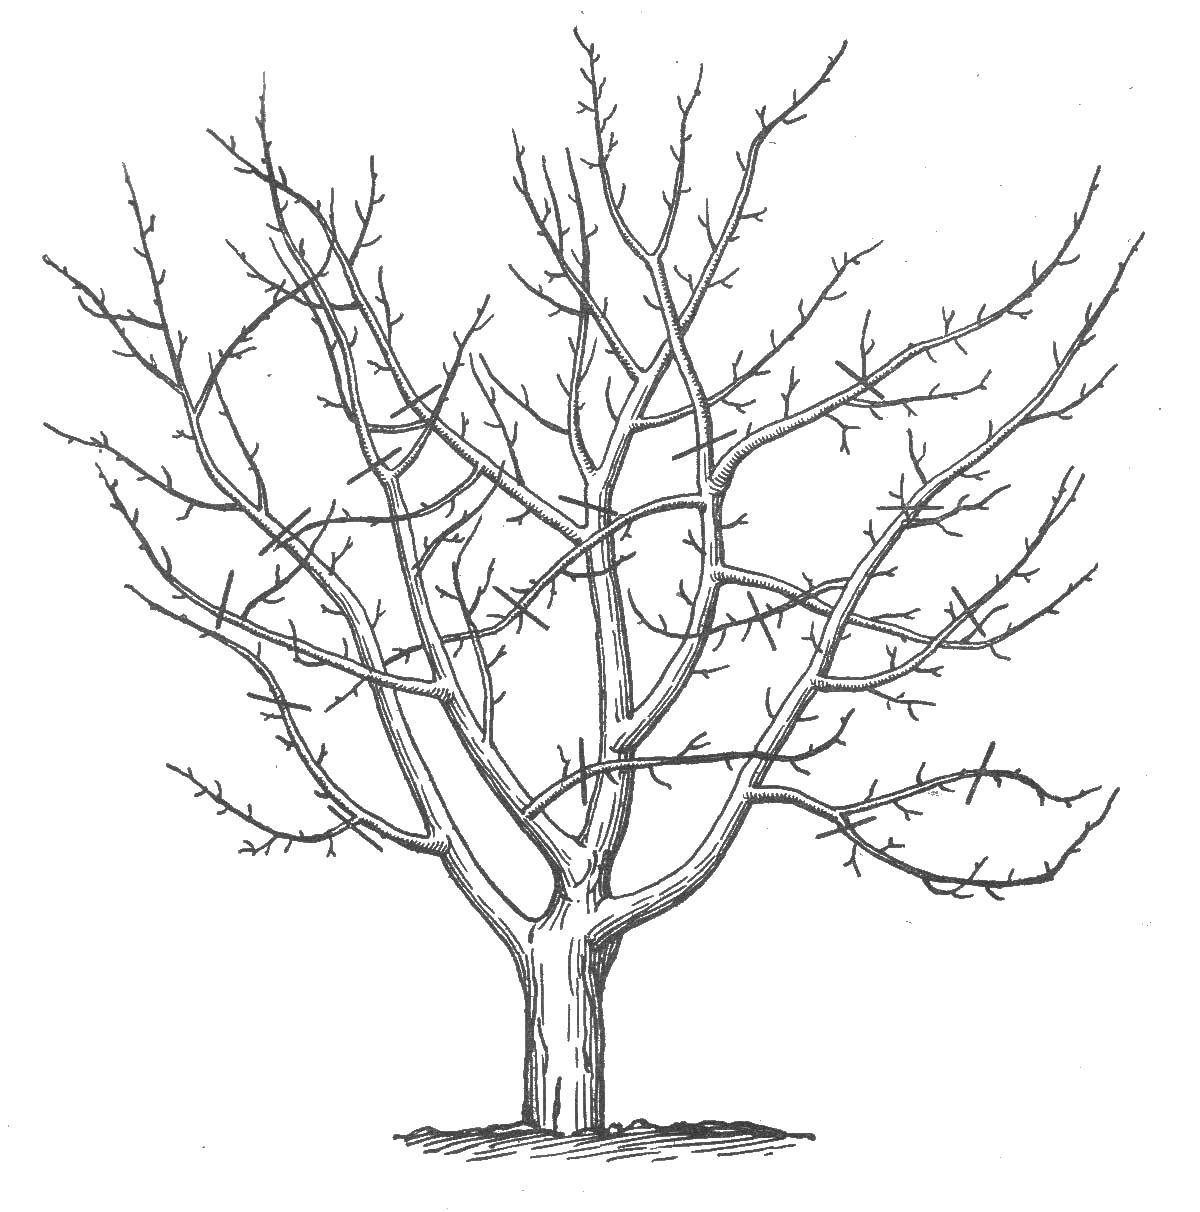 Coloring Tree without leaves. Category The contours of the leaves. Tags:  tree.